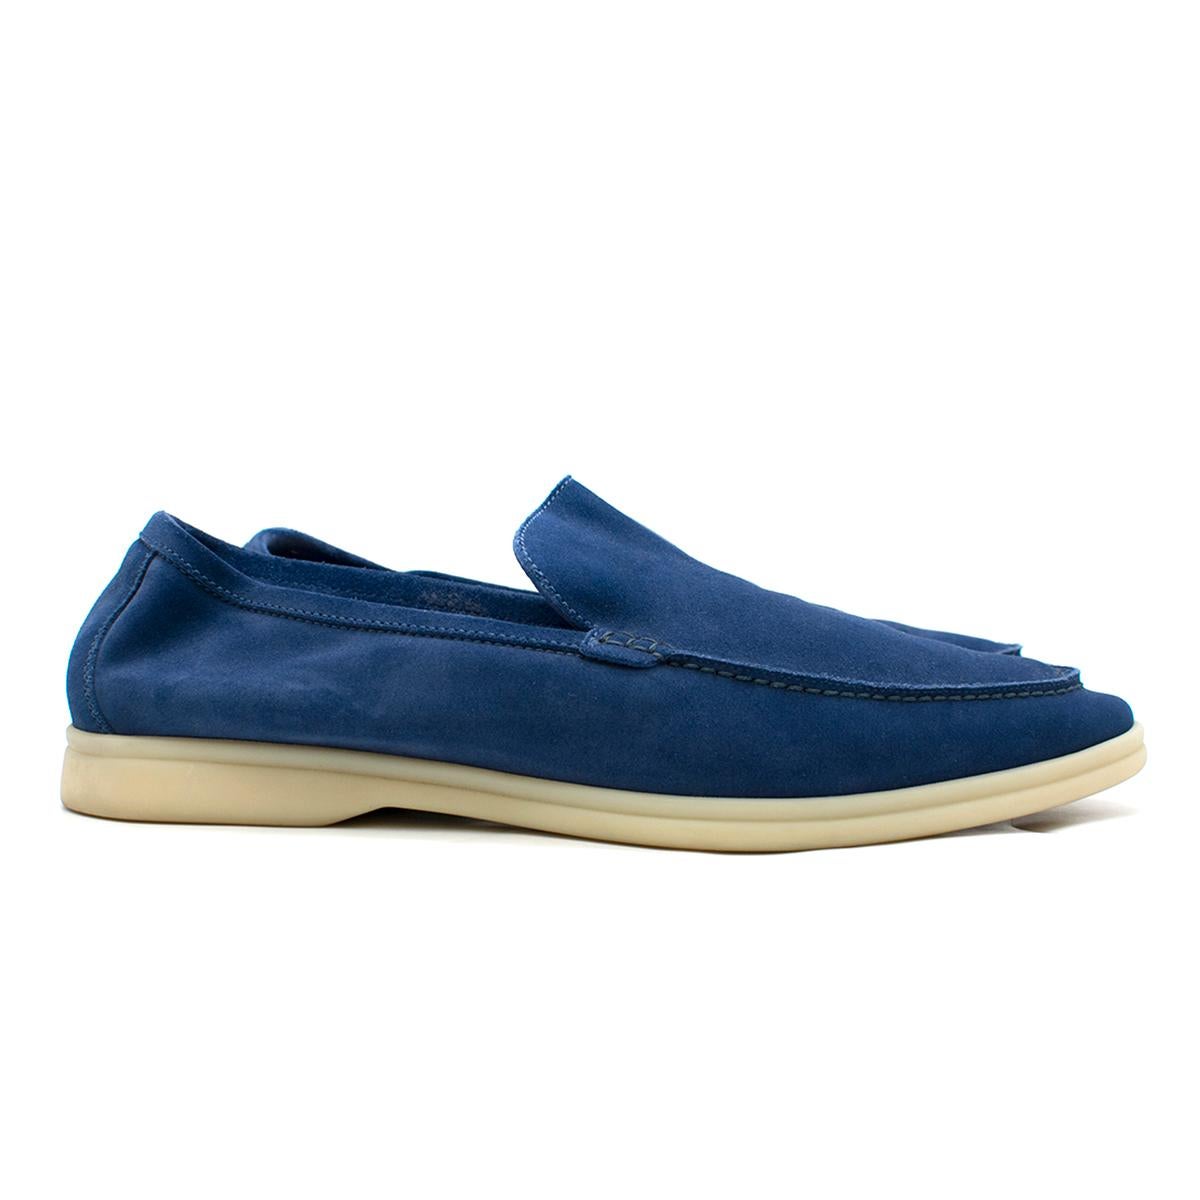 Loro Piana Summer Walk Suede Moccasin 

- Aegean blue unlined suede moccasin
- Slip-on style
- Lightweight, soft touch
- Water-repellent finish
- Nude leather lining with logo embroidered
- Light coloured latex sole
- Space on the heel for the